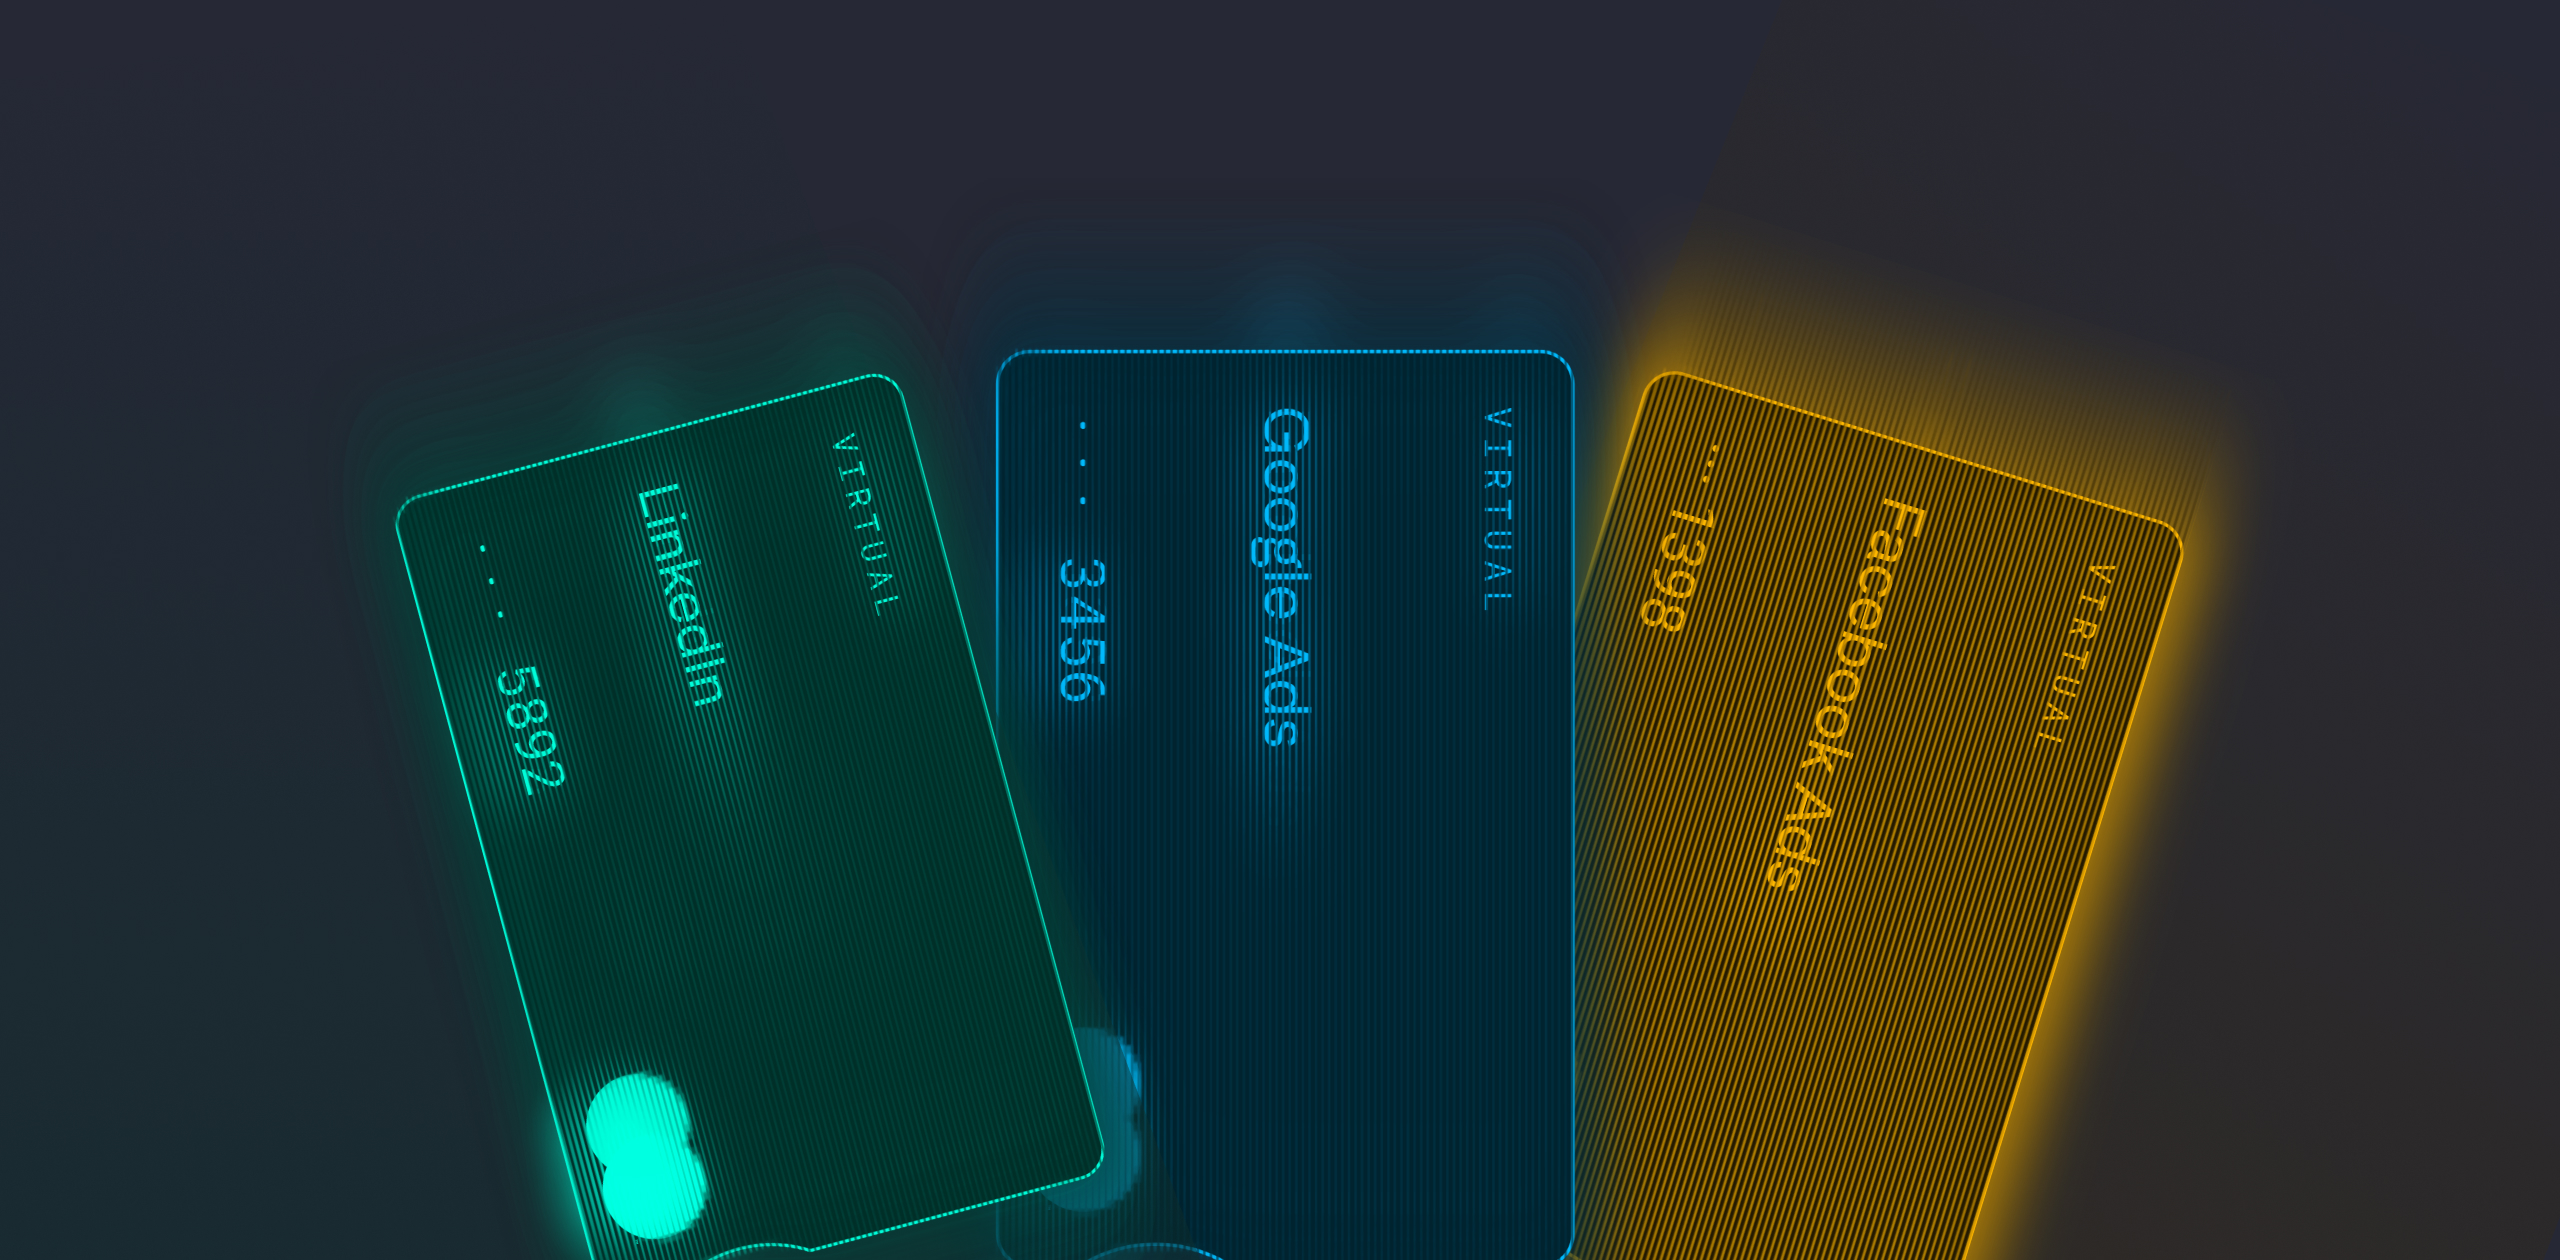 Introducing Shared cards from Equals Money